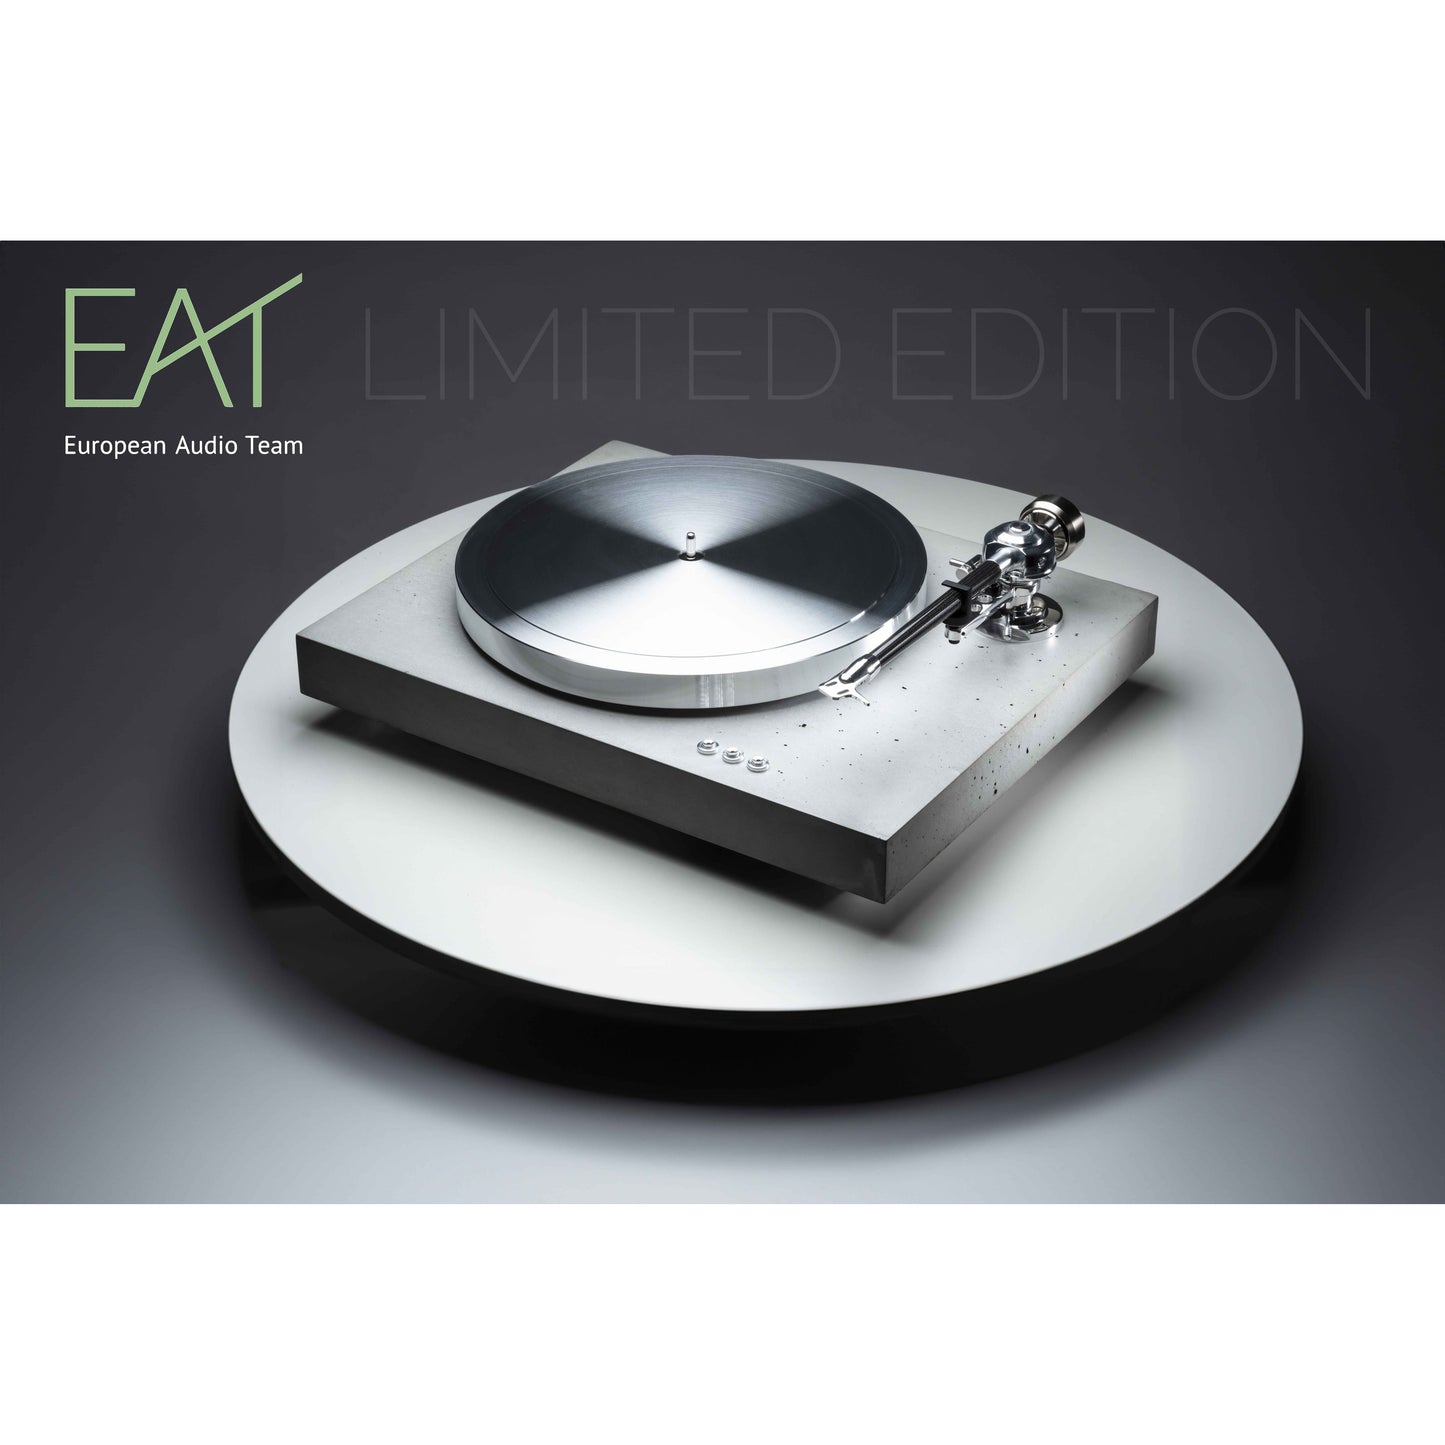 EAT Concrete Limited Edition Turntable